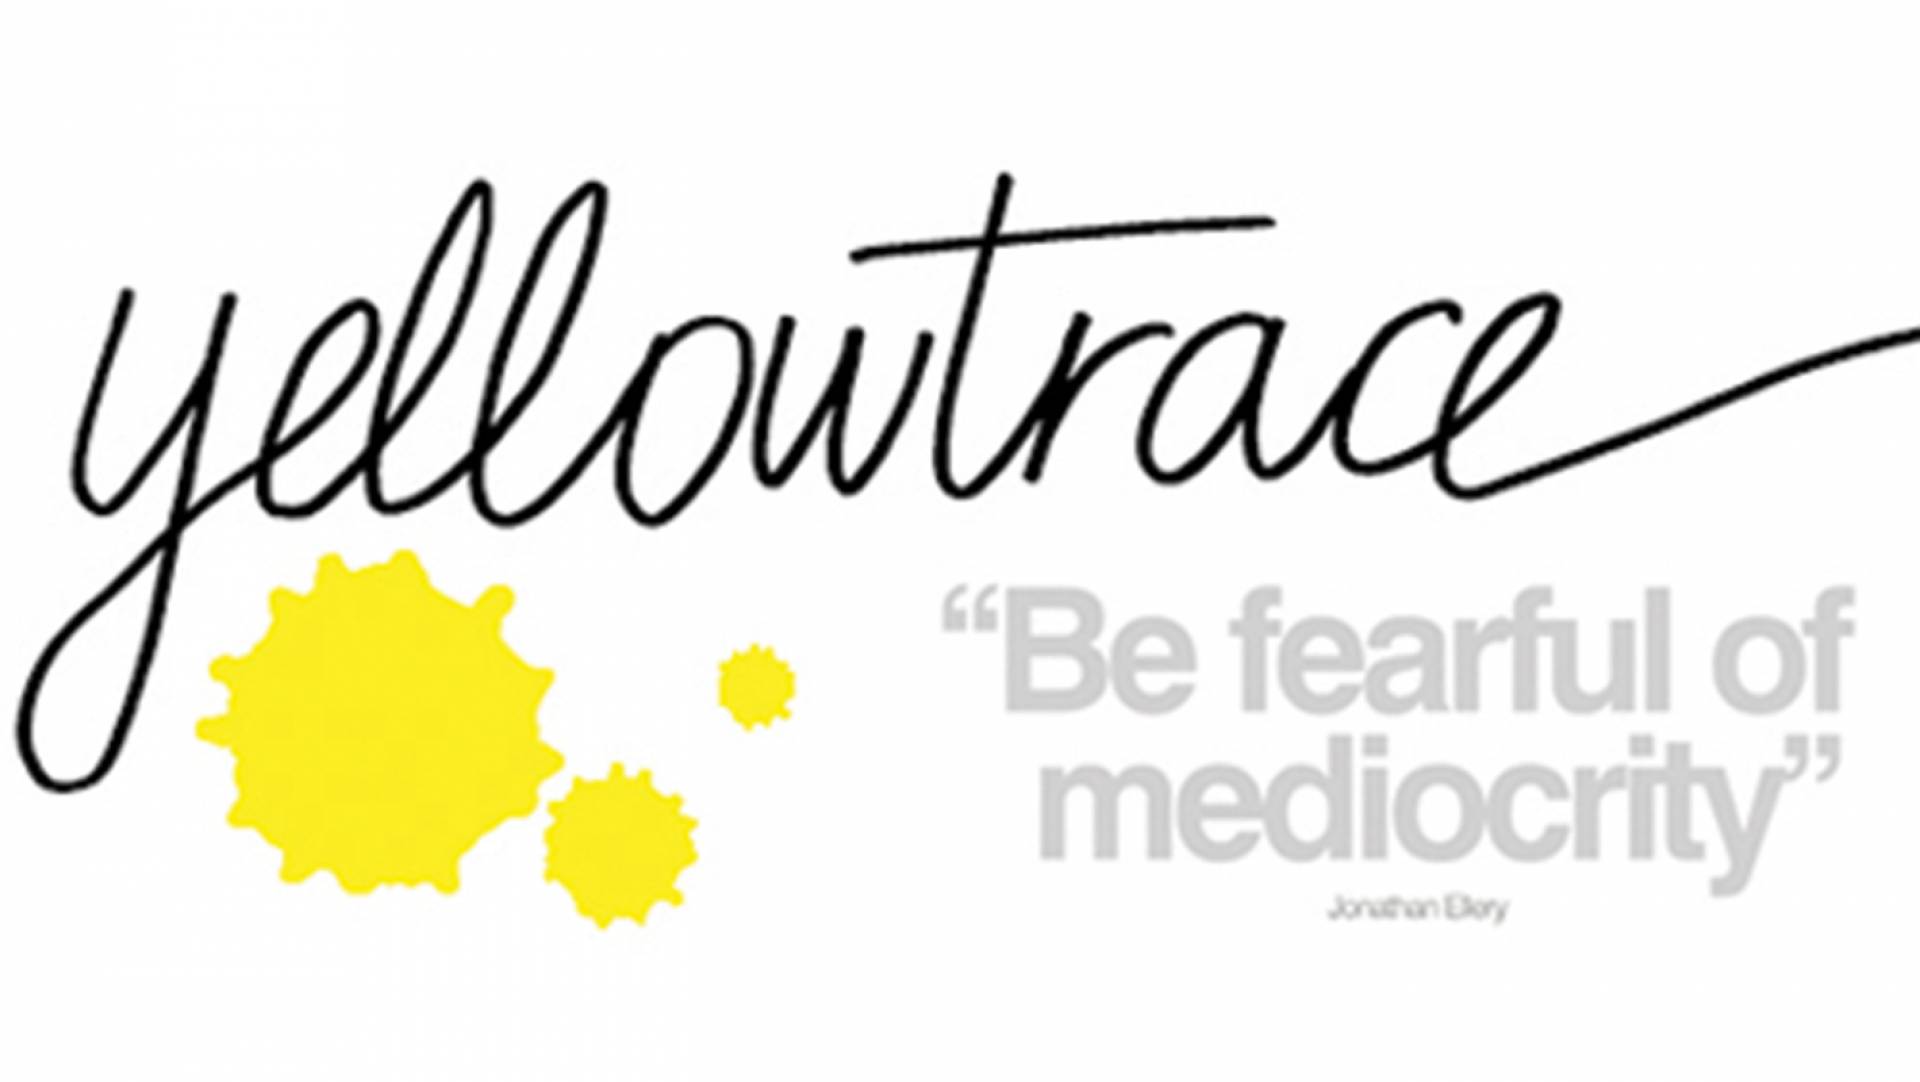 Studio Equator work done for GLUX is showcased in popular local blog “Yellowtrace”